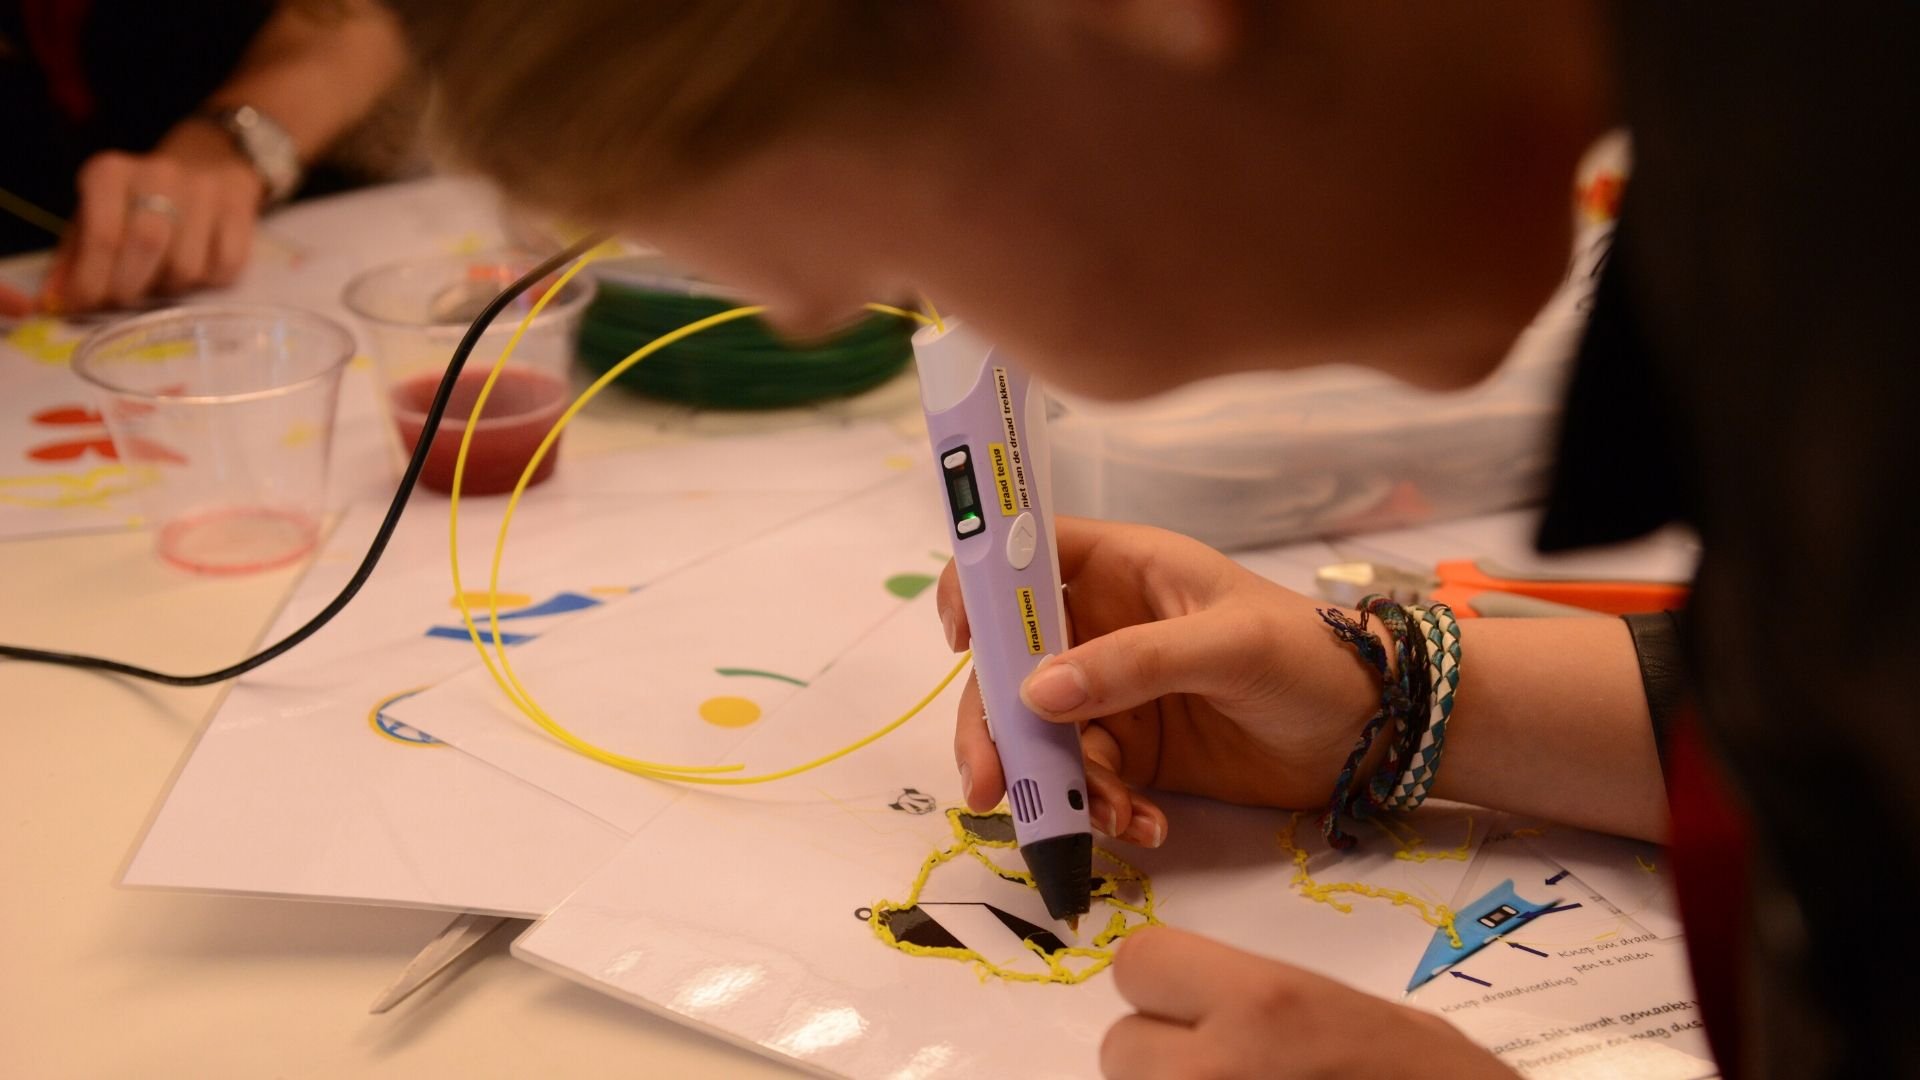 A teenager uses technology for crafts at ASML's annual Girls Day in Veldhoven, the Netherlands